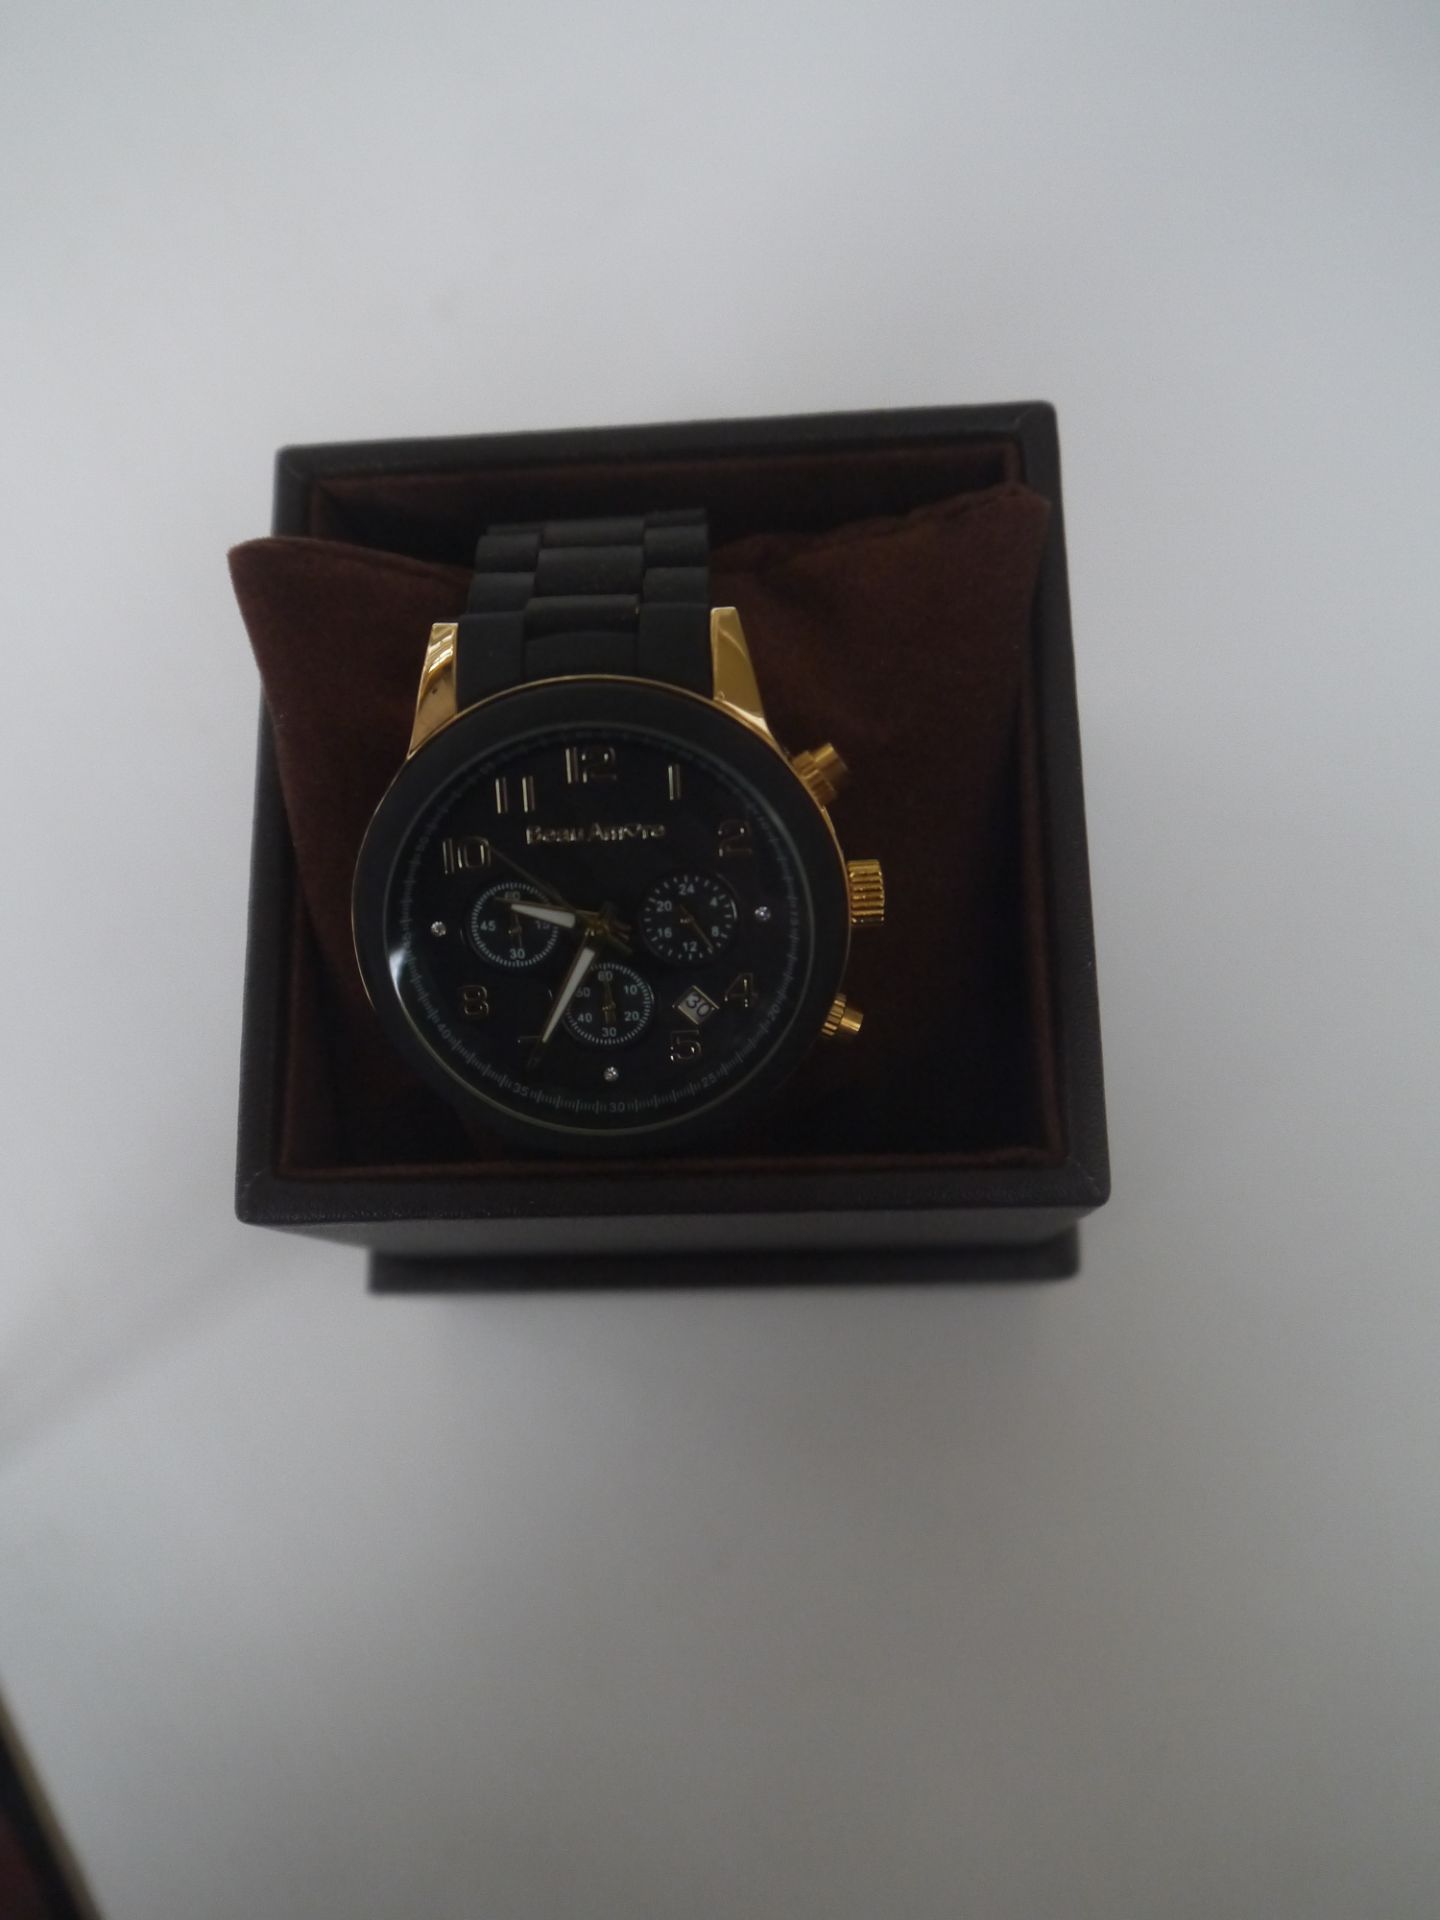 NO VAT!!! Beau Amore Designer Black and Gold watch in the style of the Michael Kors classic. New, - Image 2 of 2